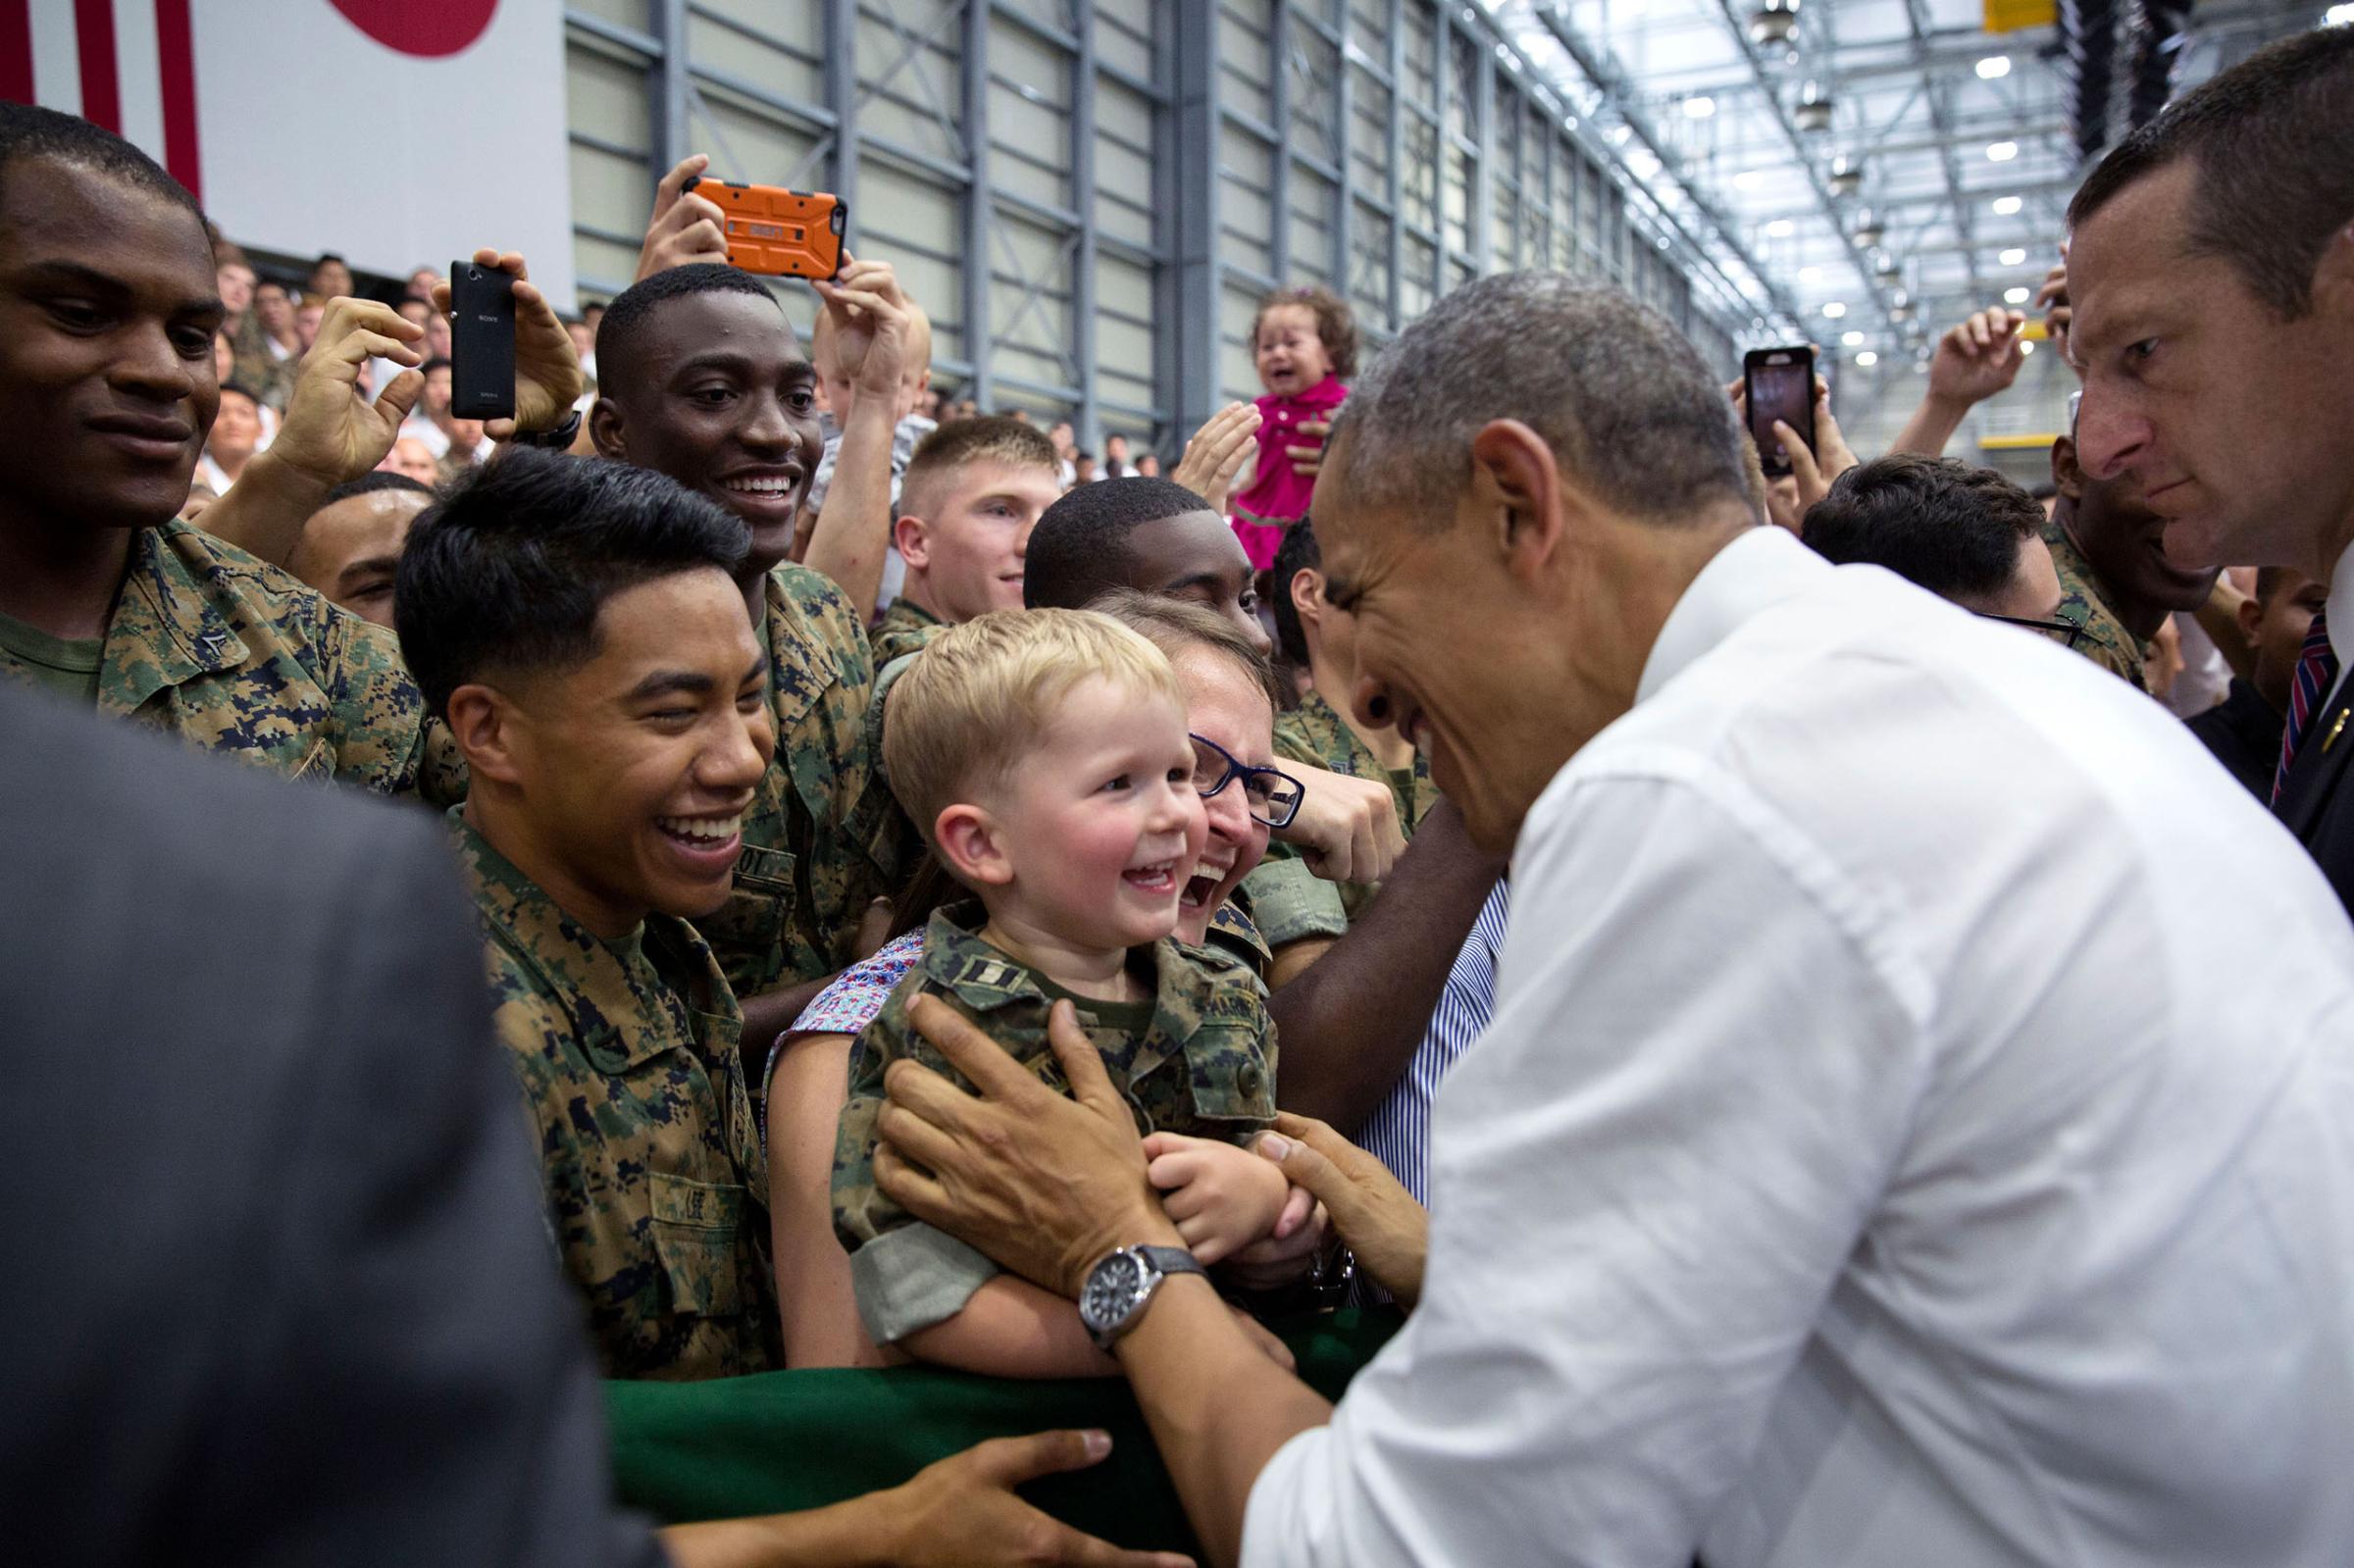 President Barack Obama gets a smile from a young boy as he greets audience members after remarks at Marine Corps Air Station Iwakuni, Japan, May 27, 2016. (Official White House Photo by Pete Souza)This official White House photograph is being made available only for publication by news organizations and/or for personal use printing by the subject(s) of the photograph. The photograph may not be manipulated in any way and may not be used in commercial or political materials, advertisements, emails, products, promotions that in any way suggests approval or endorsement of the President, the First Family, or the White House.